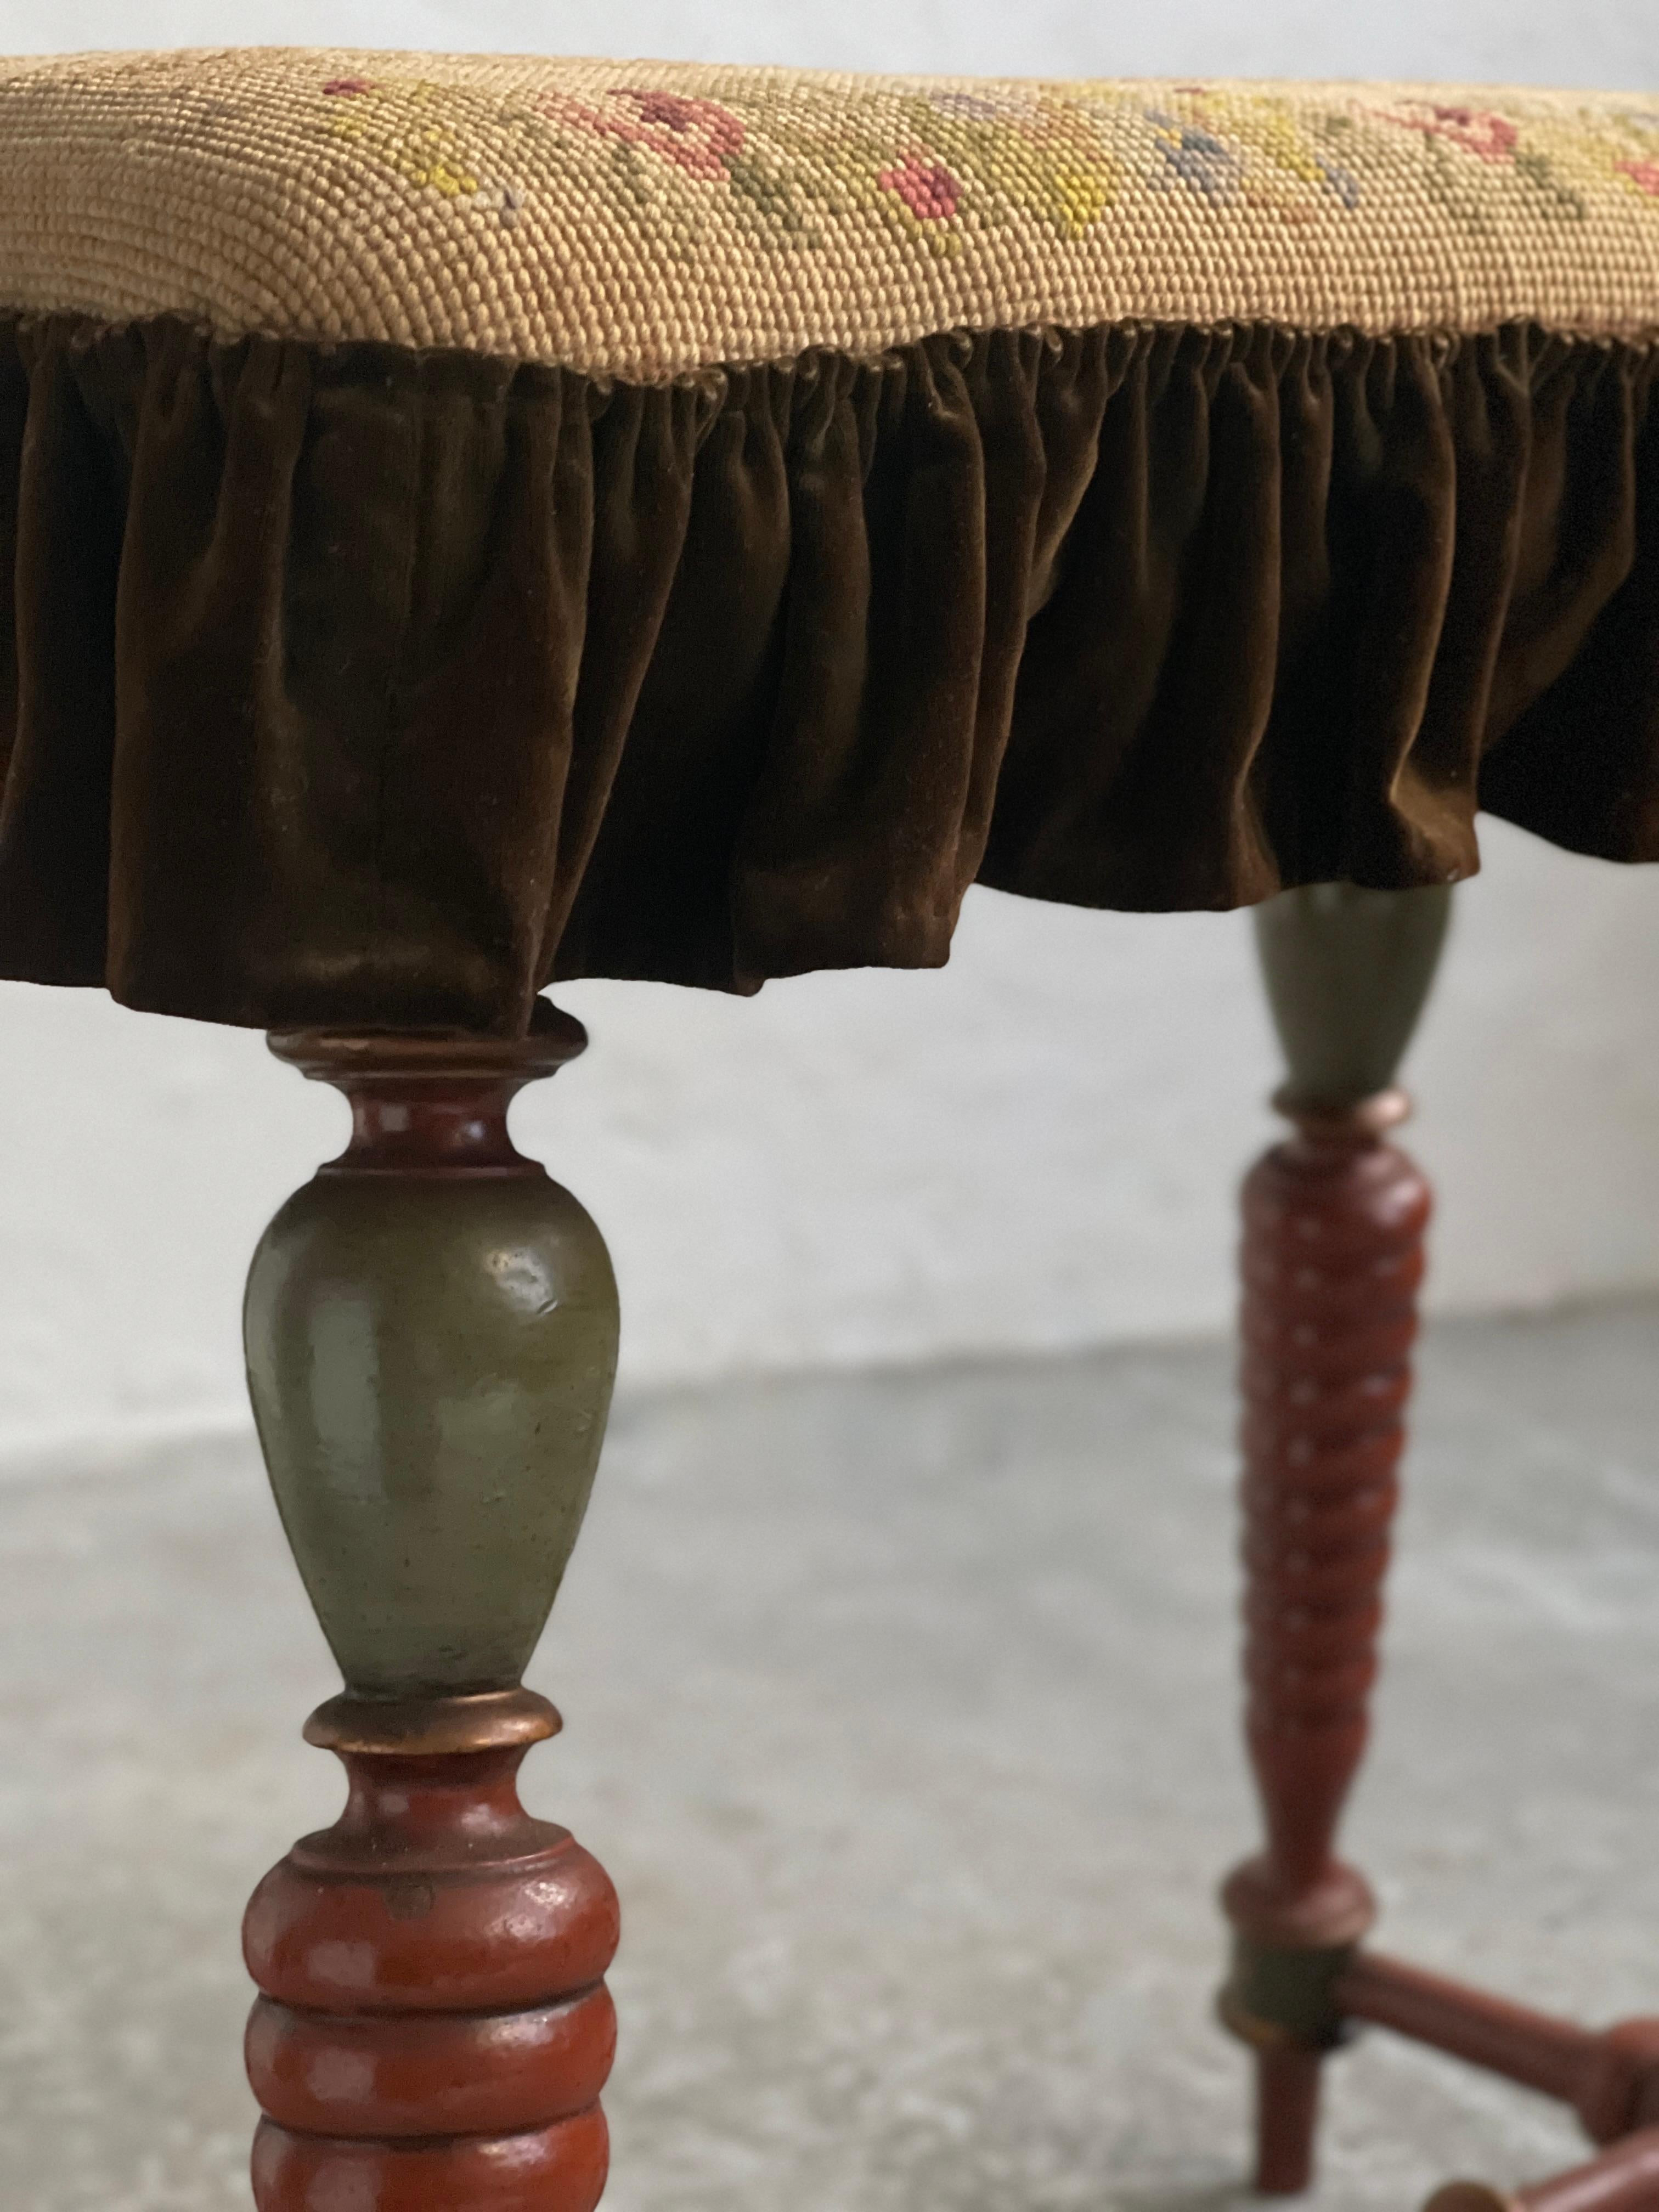 Late 19th Century Danish Late 19th century Stool with carved painted legs and embroidered seat.